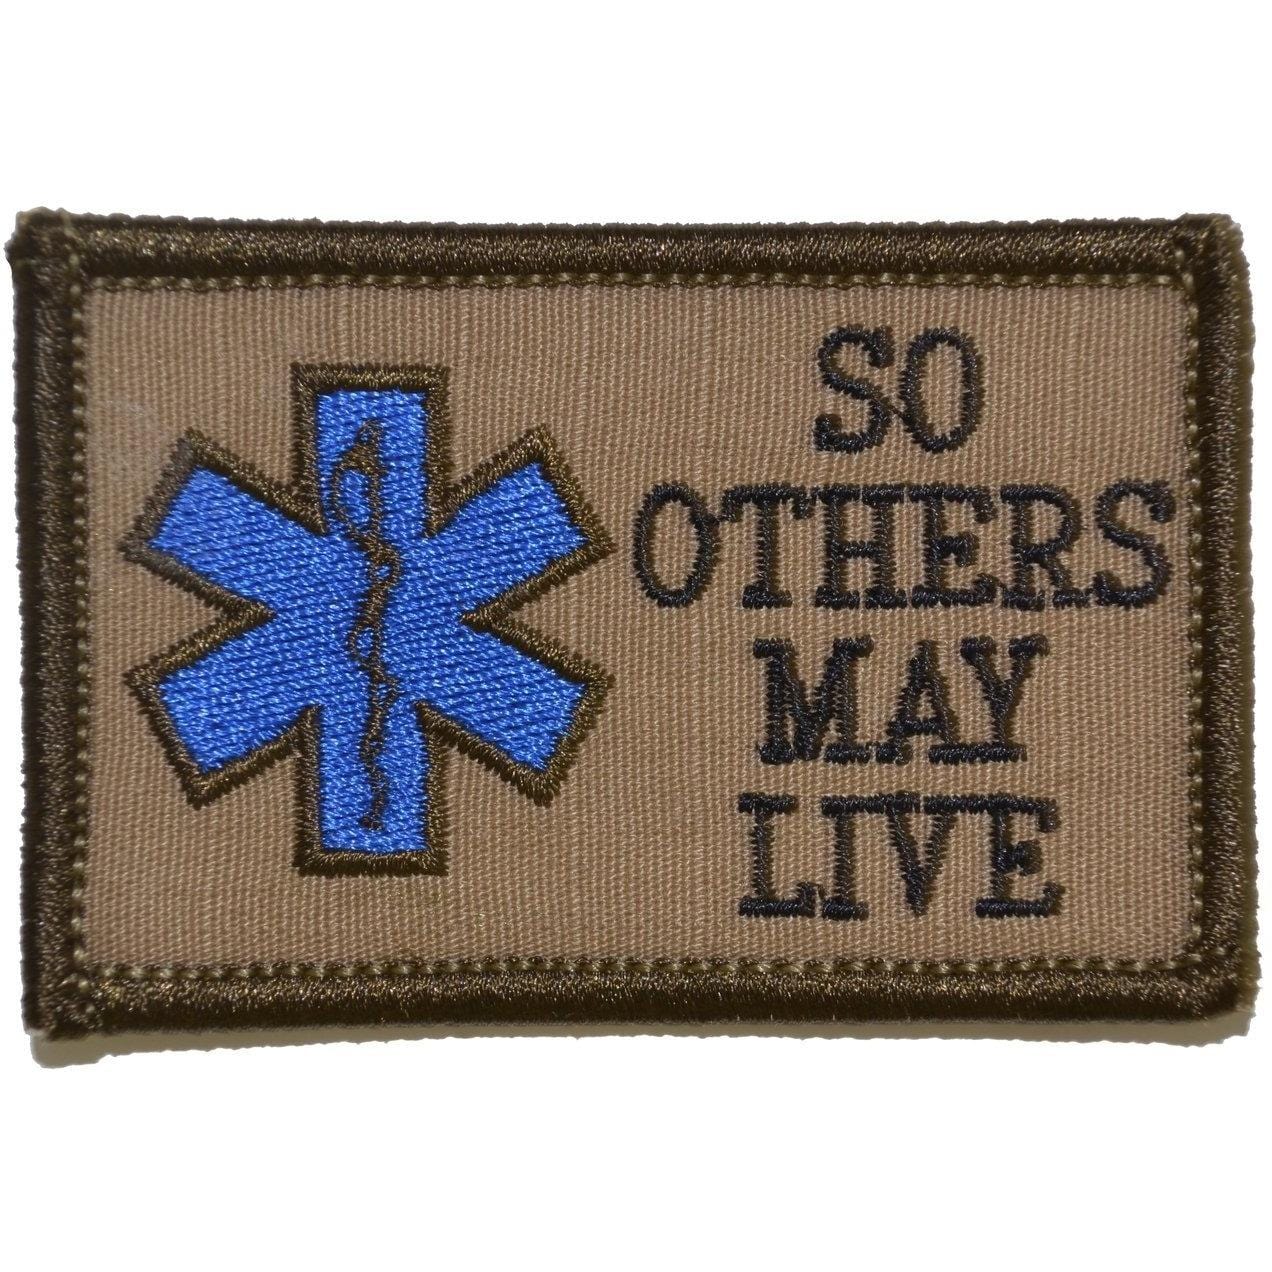 Tactical Gear Junkie Patches Coyote Brown w/ Black EMS So Others May Live - 2x3 Patch